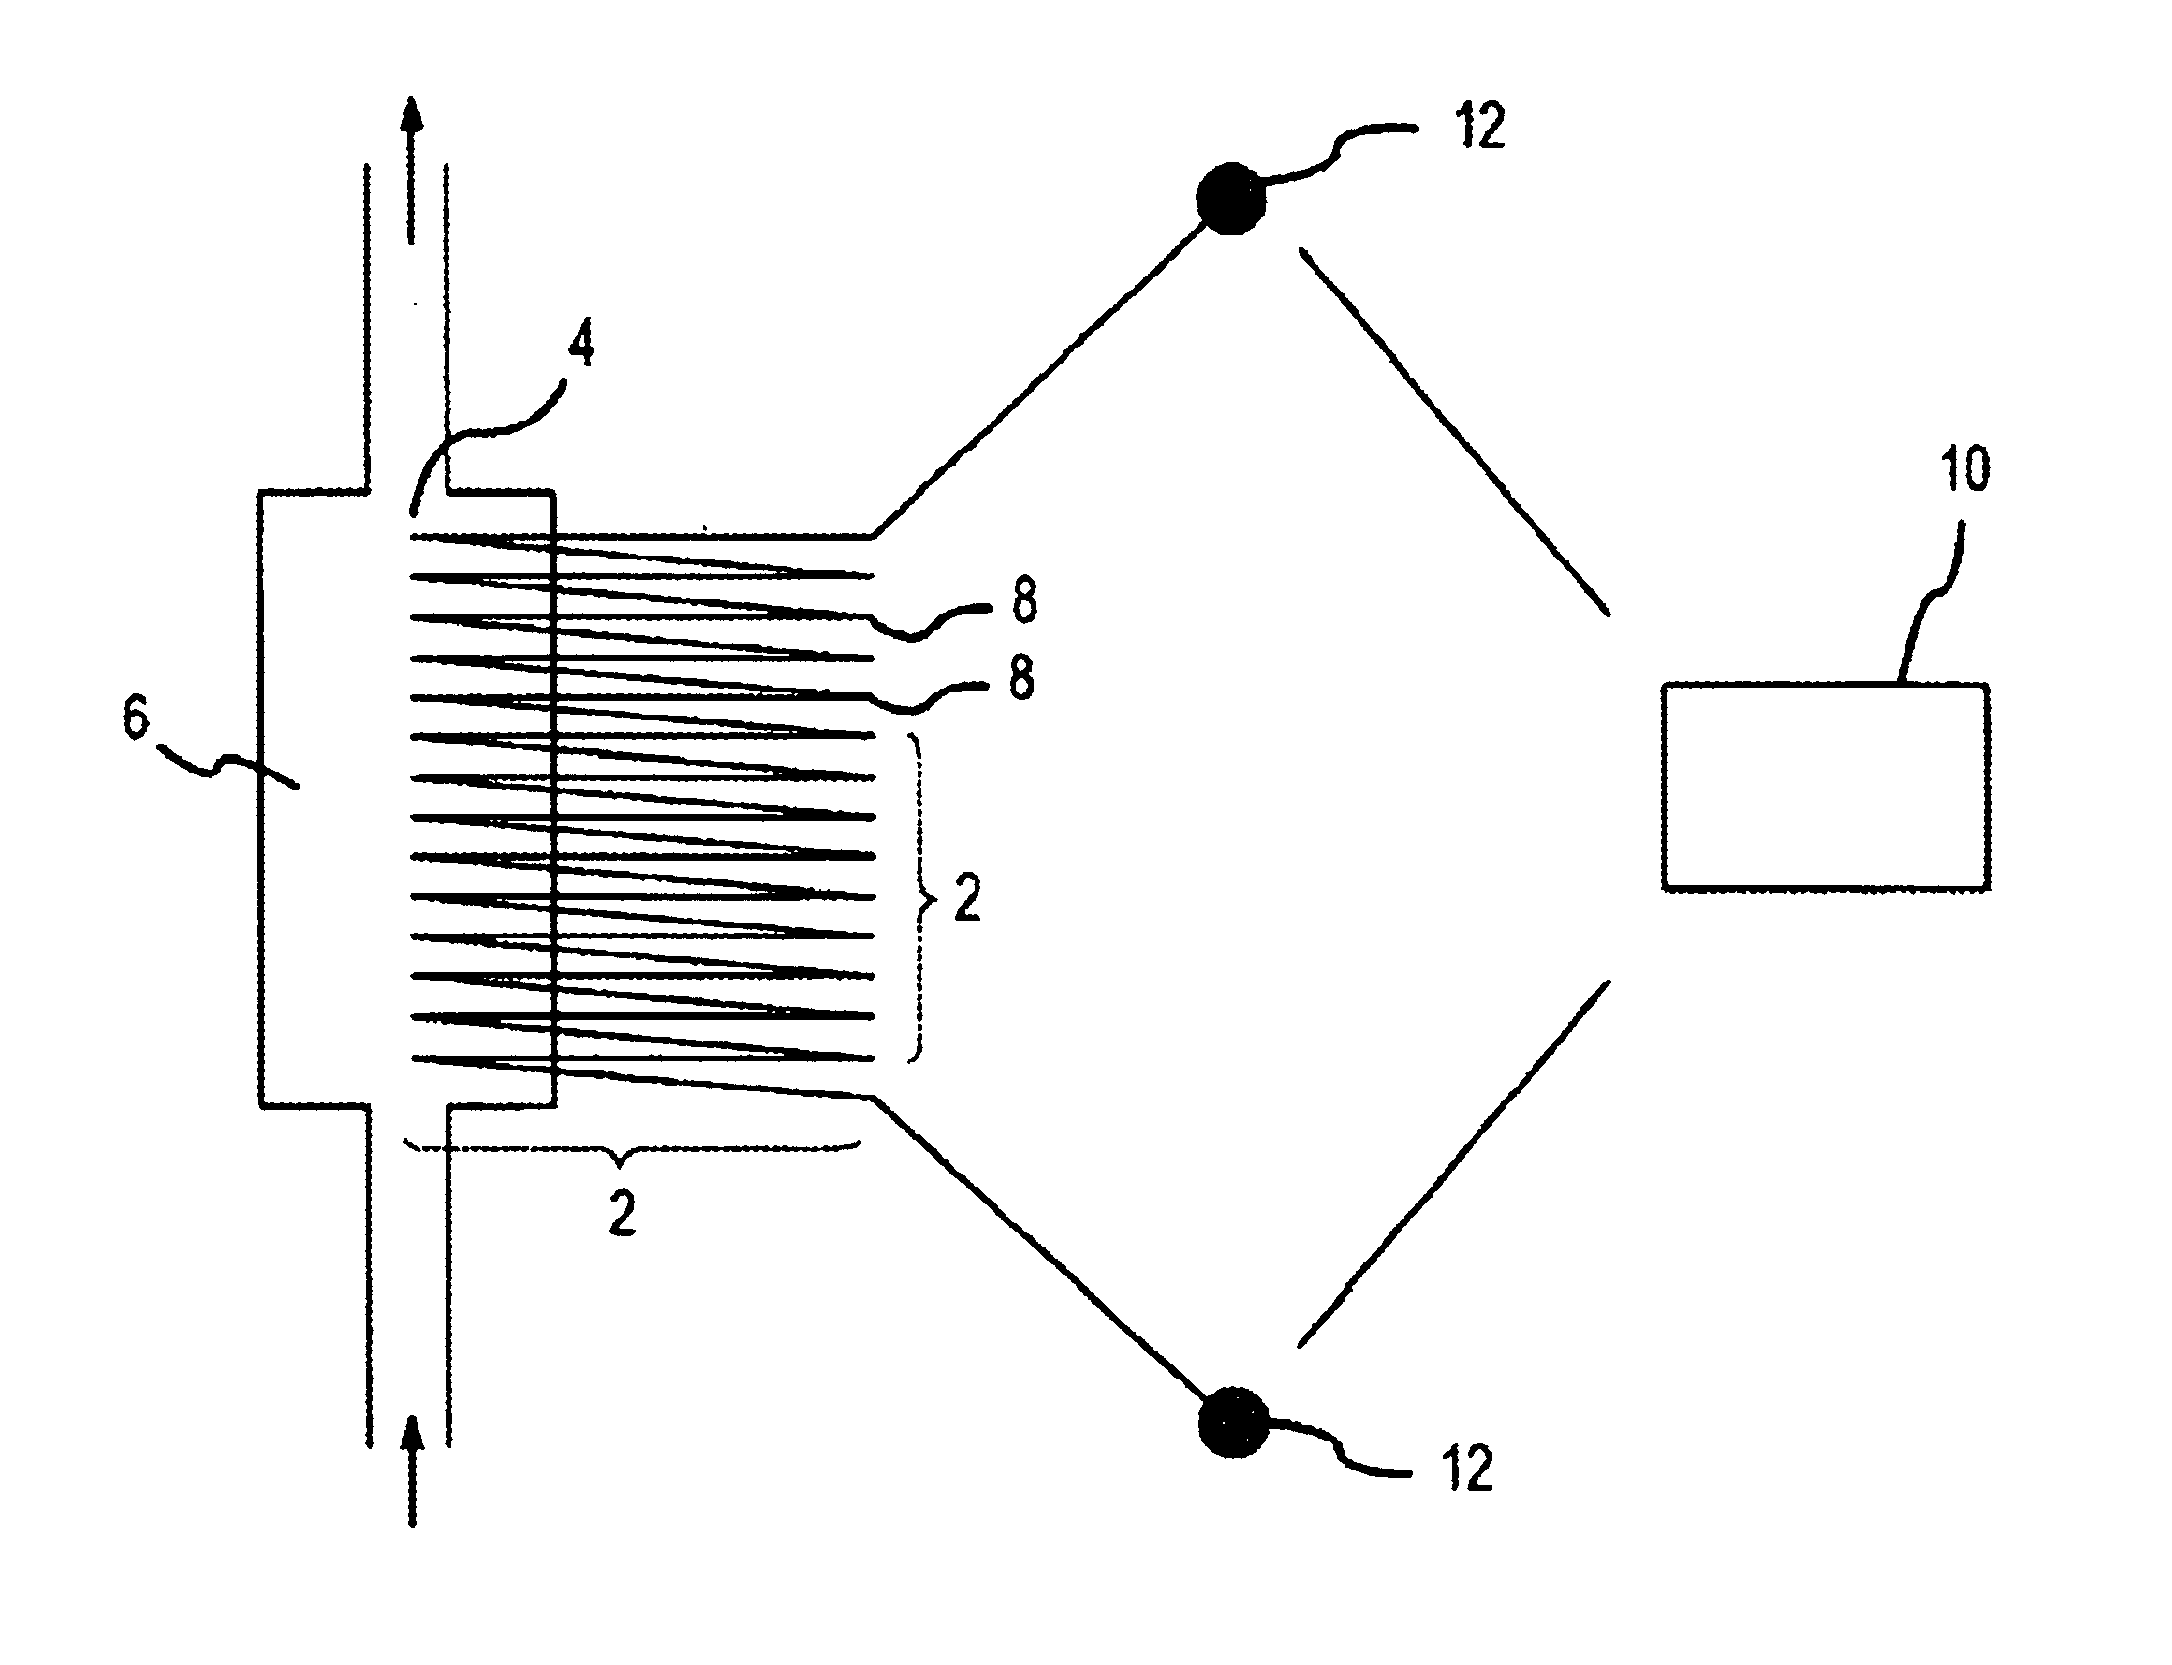 Method of determining the nucleotide sequence of oligonucleotides and DNA molecules